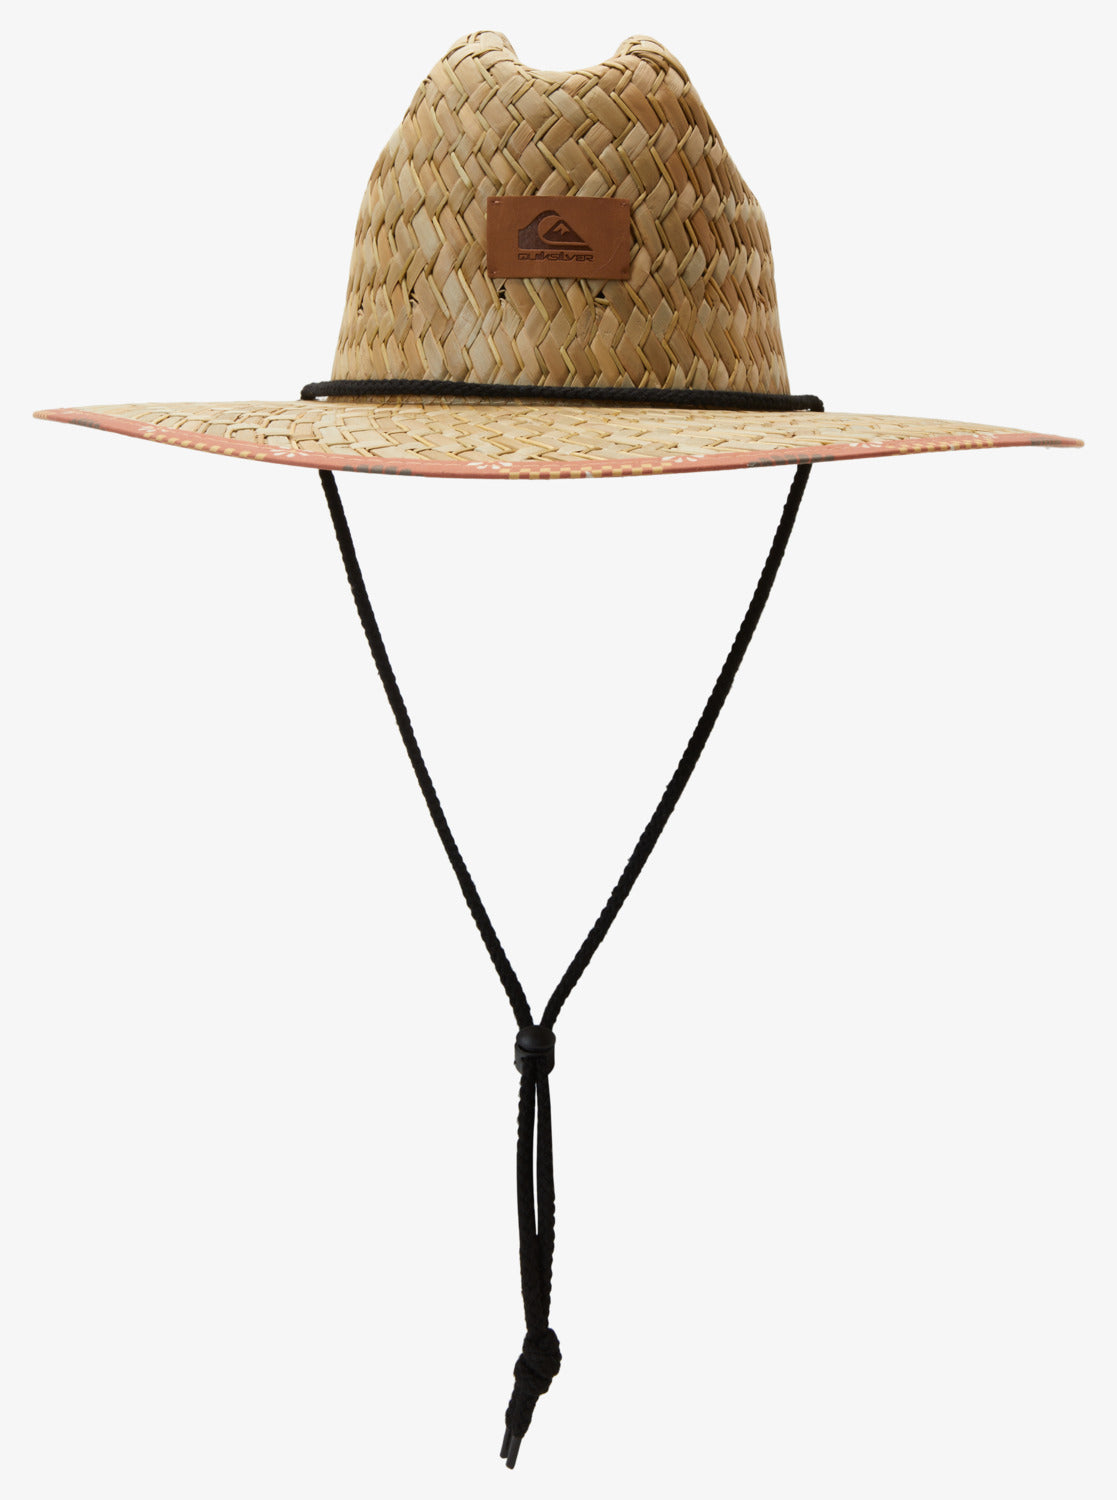 Quiksilver Outsider Straw Lifeguard Hat Brown Size L/XL